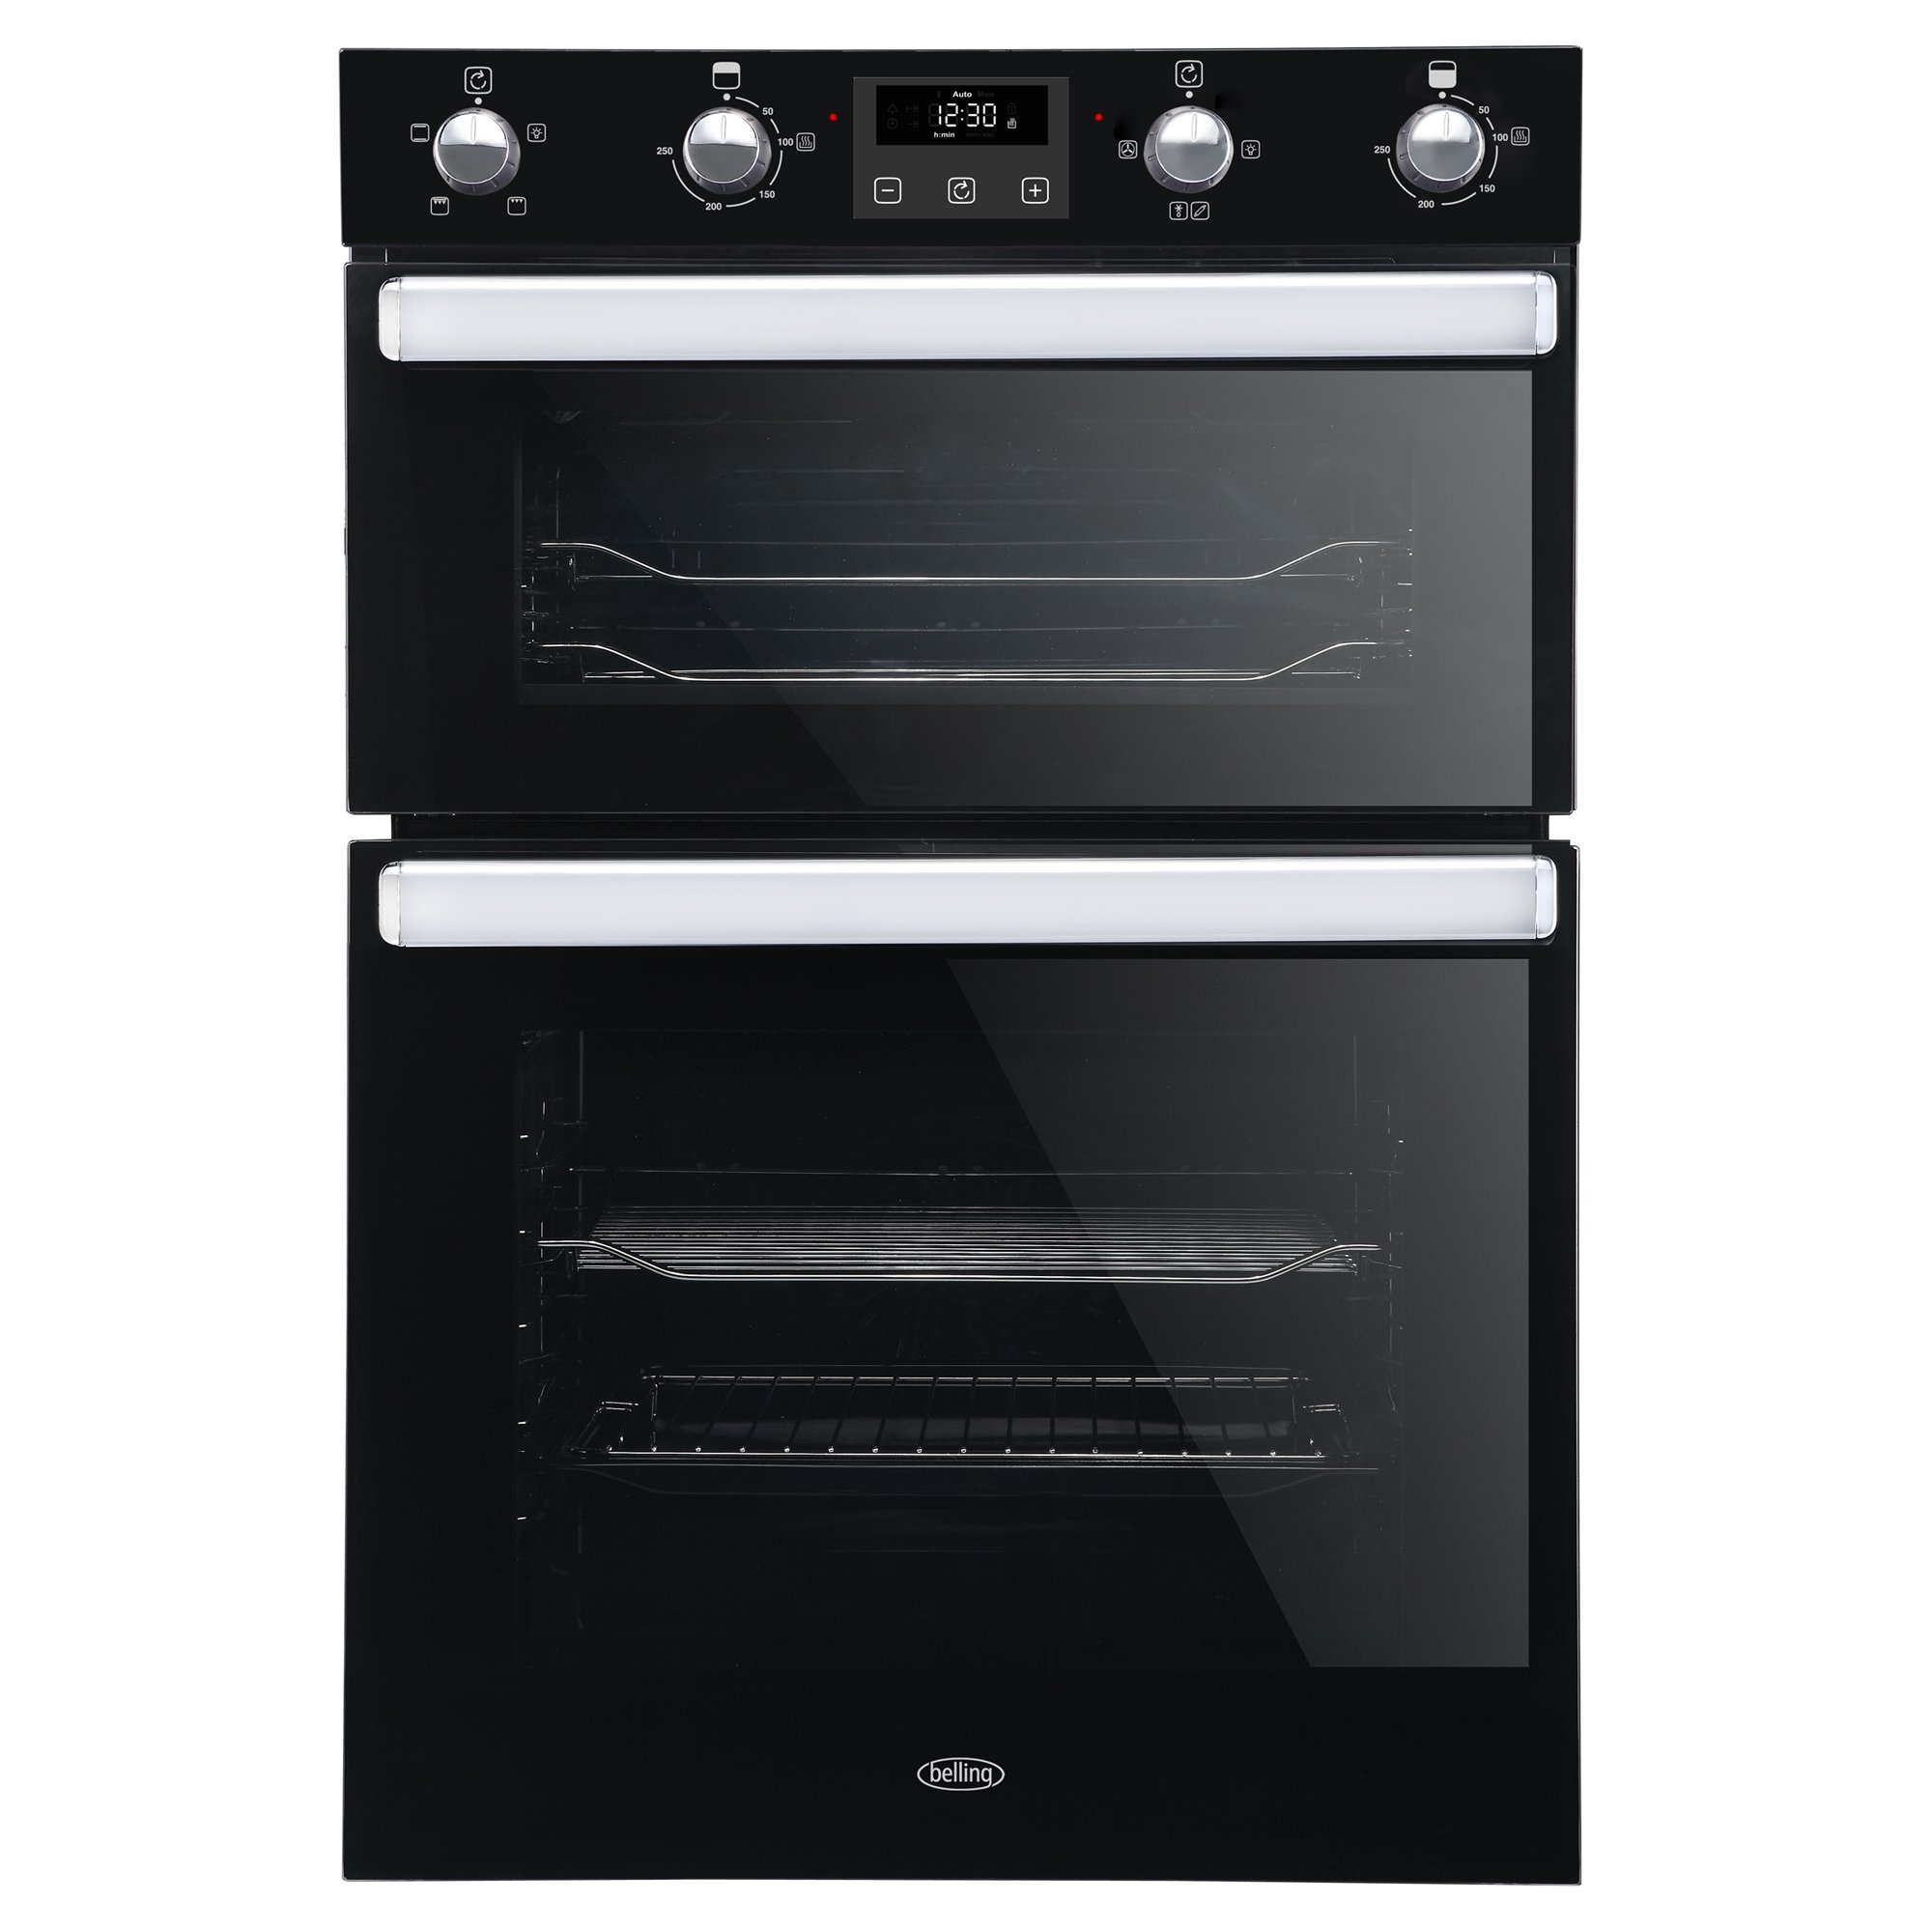 90cm double oven with 44L top oven, 72L gross main oven capacity and easy clean enamel. Additional features include soft close doors, programmable timer, variable rate grill and triple glazed glass. A energy rating.